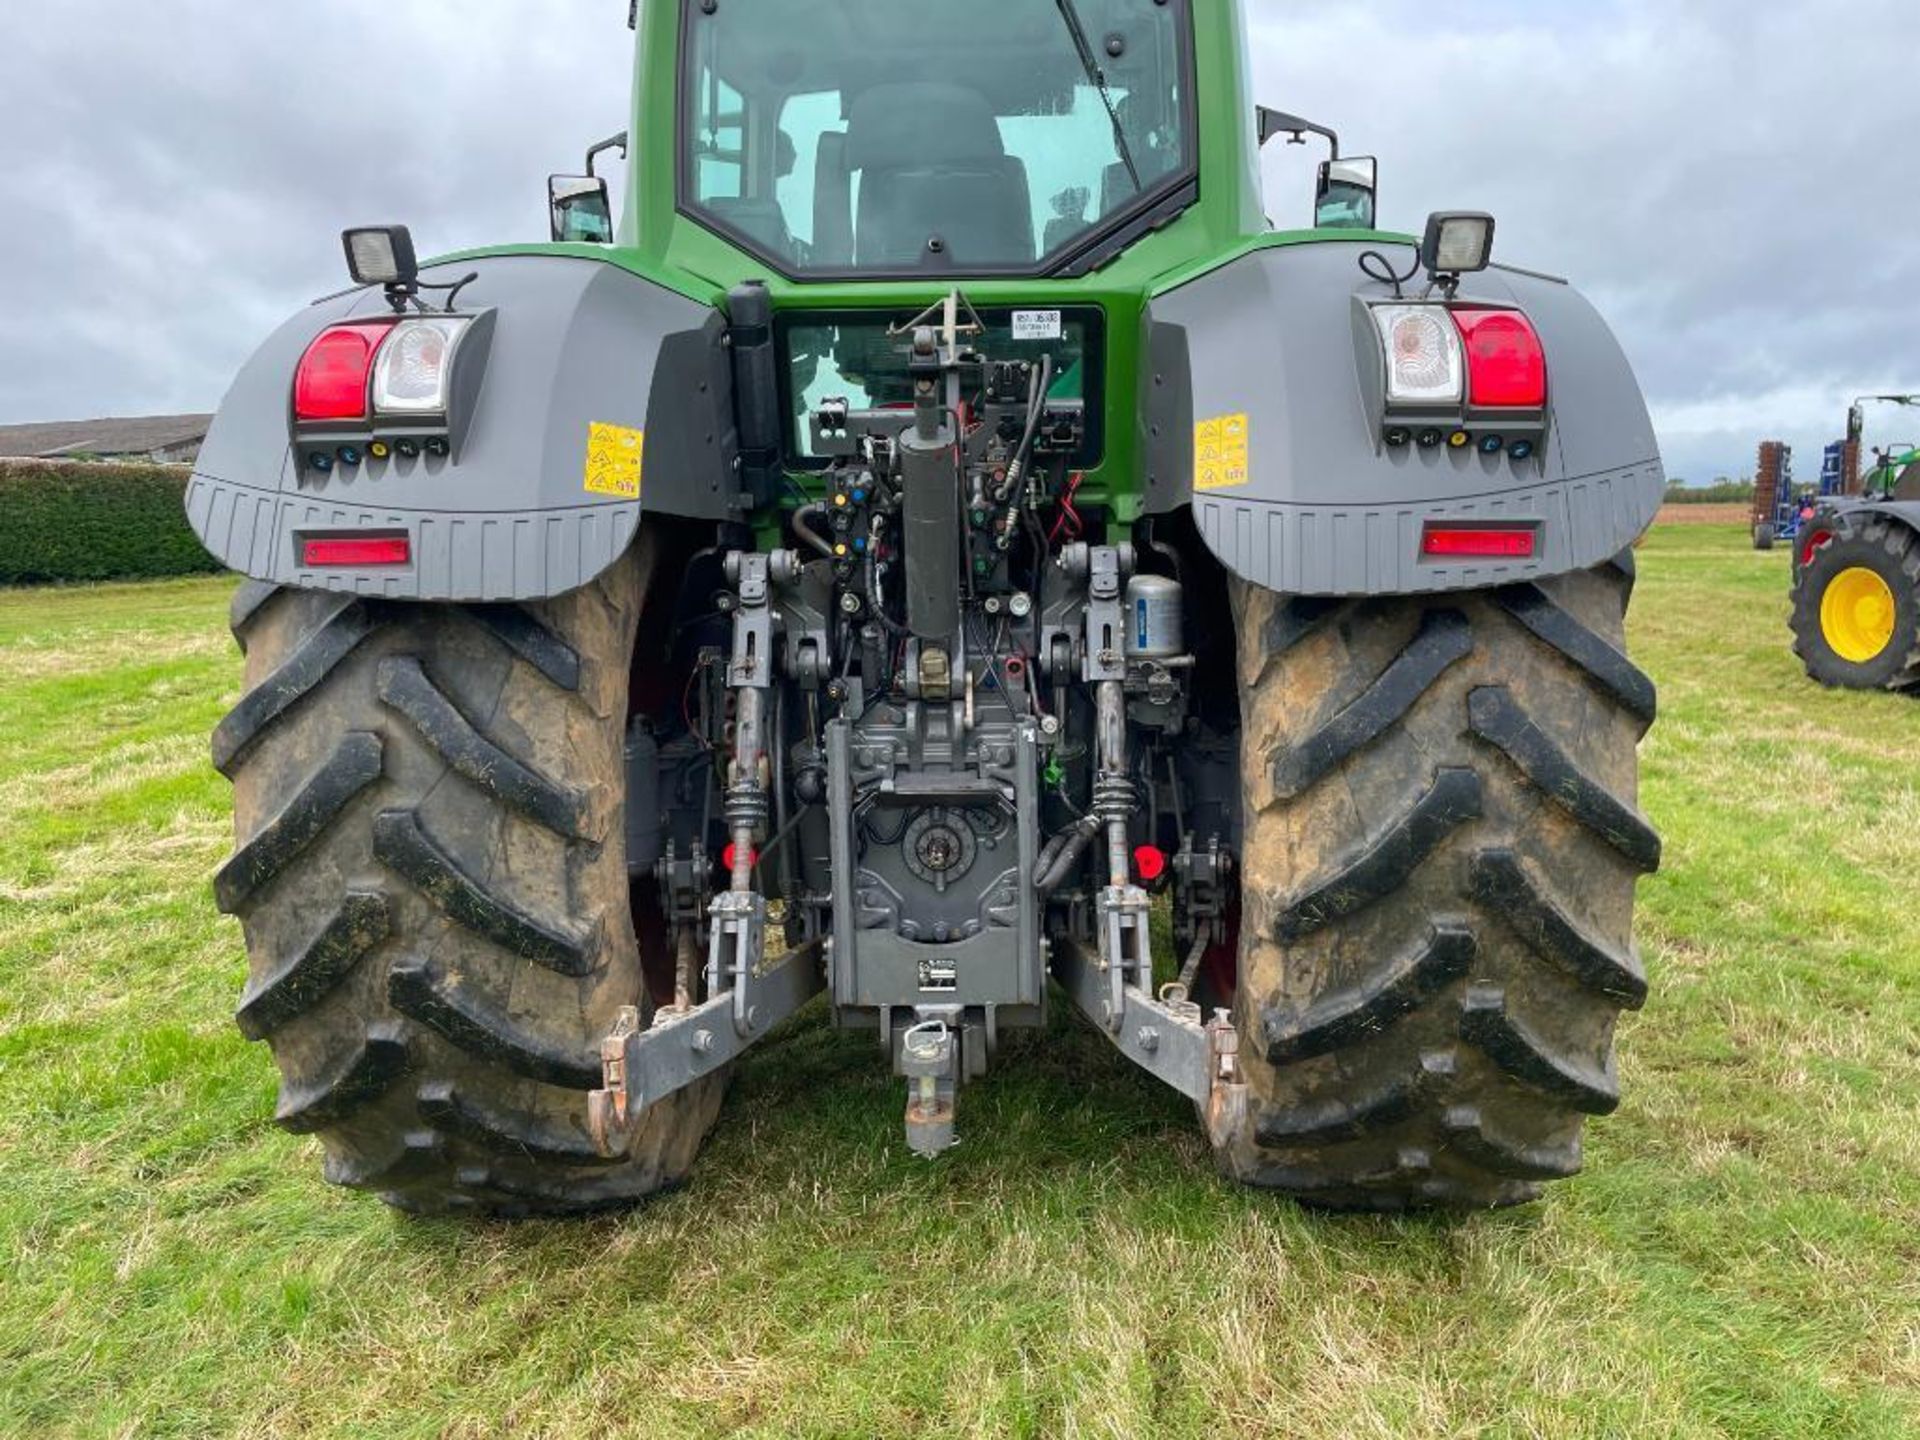 2018 Fendt 930 Vario Profi Plus 65kph 4wd tractor with front and cab suspension, front linkage and h - Image 10 of 20